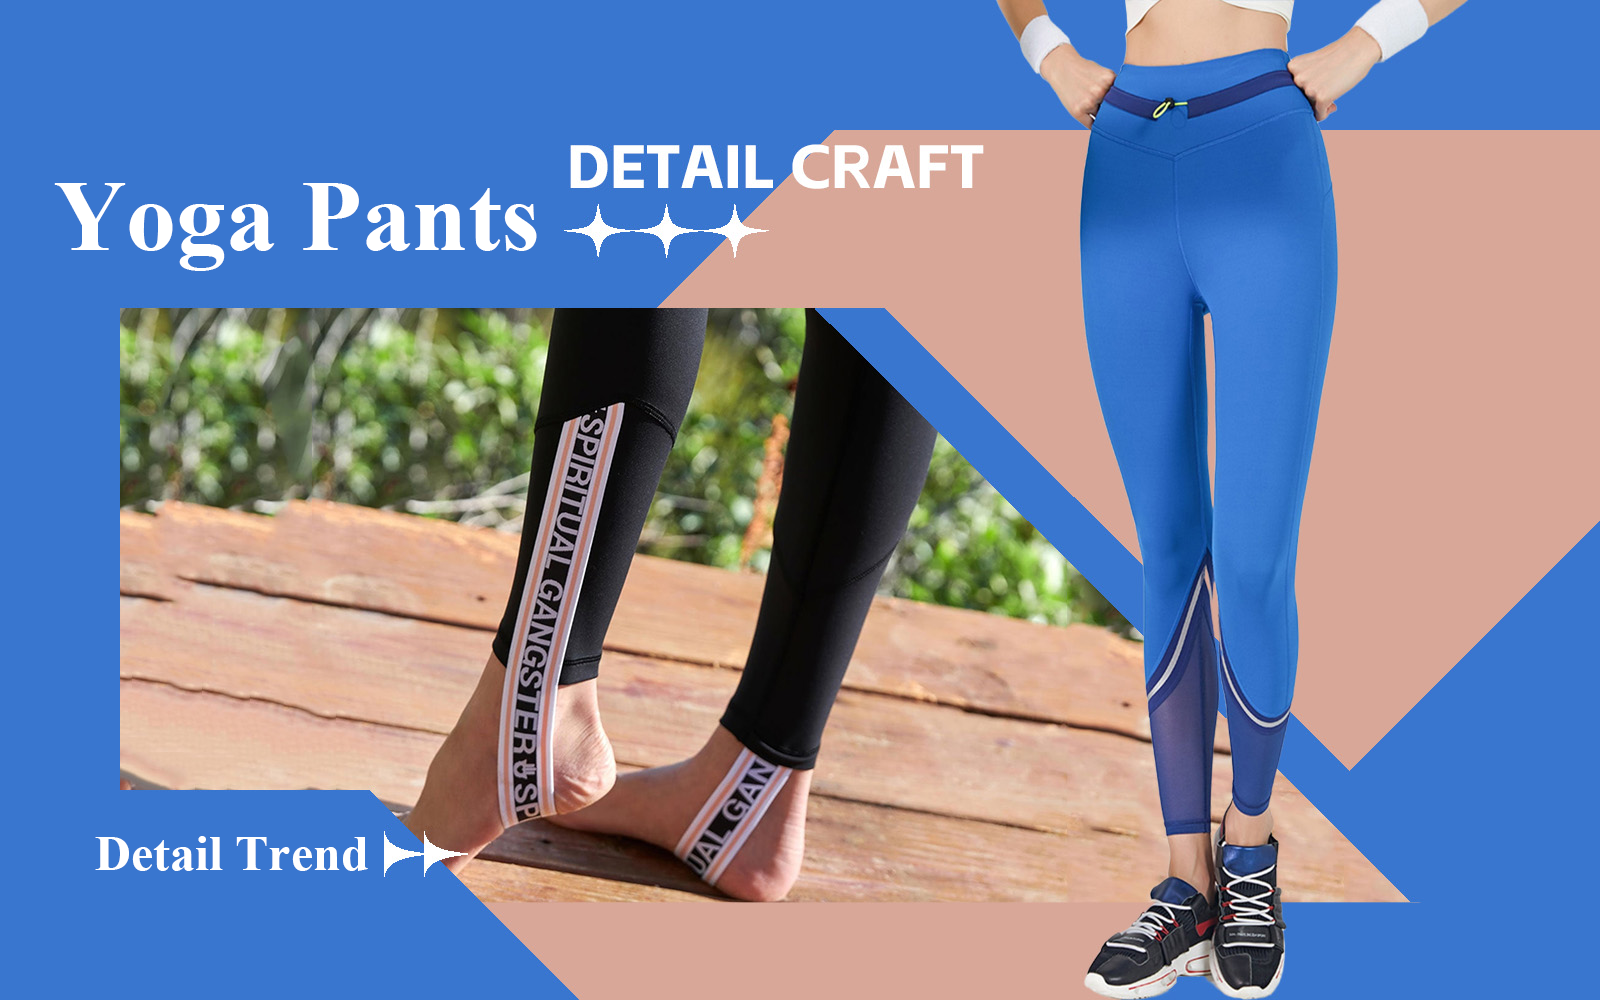 Balance Aesthetics -- The Detail & Craft Trend for Yoga Pants